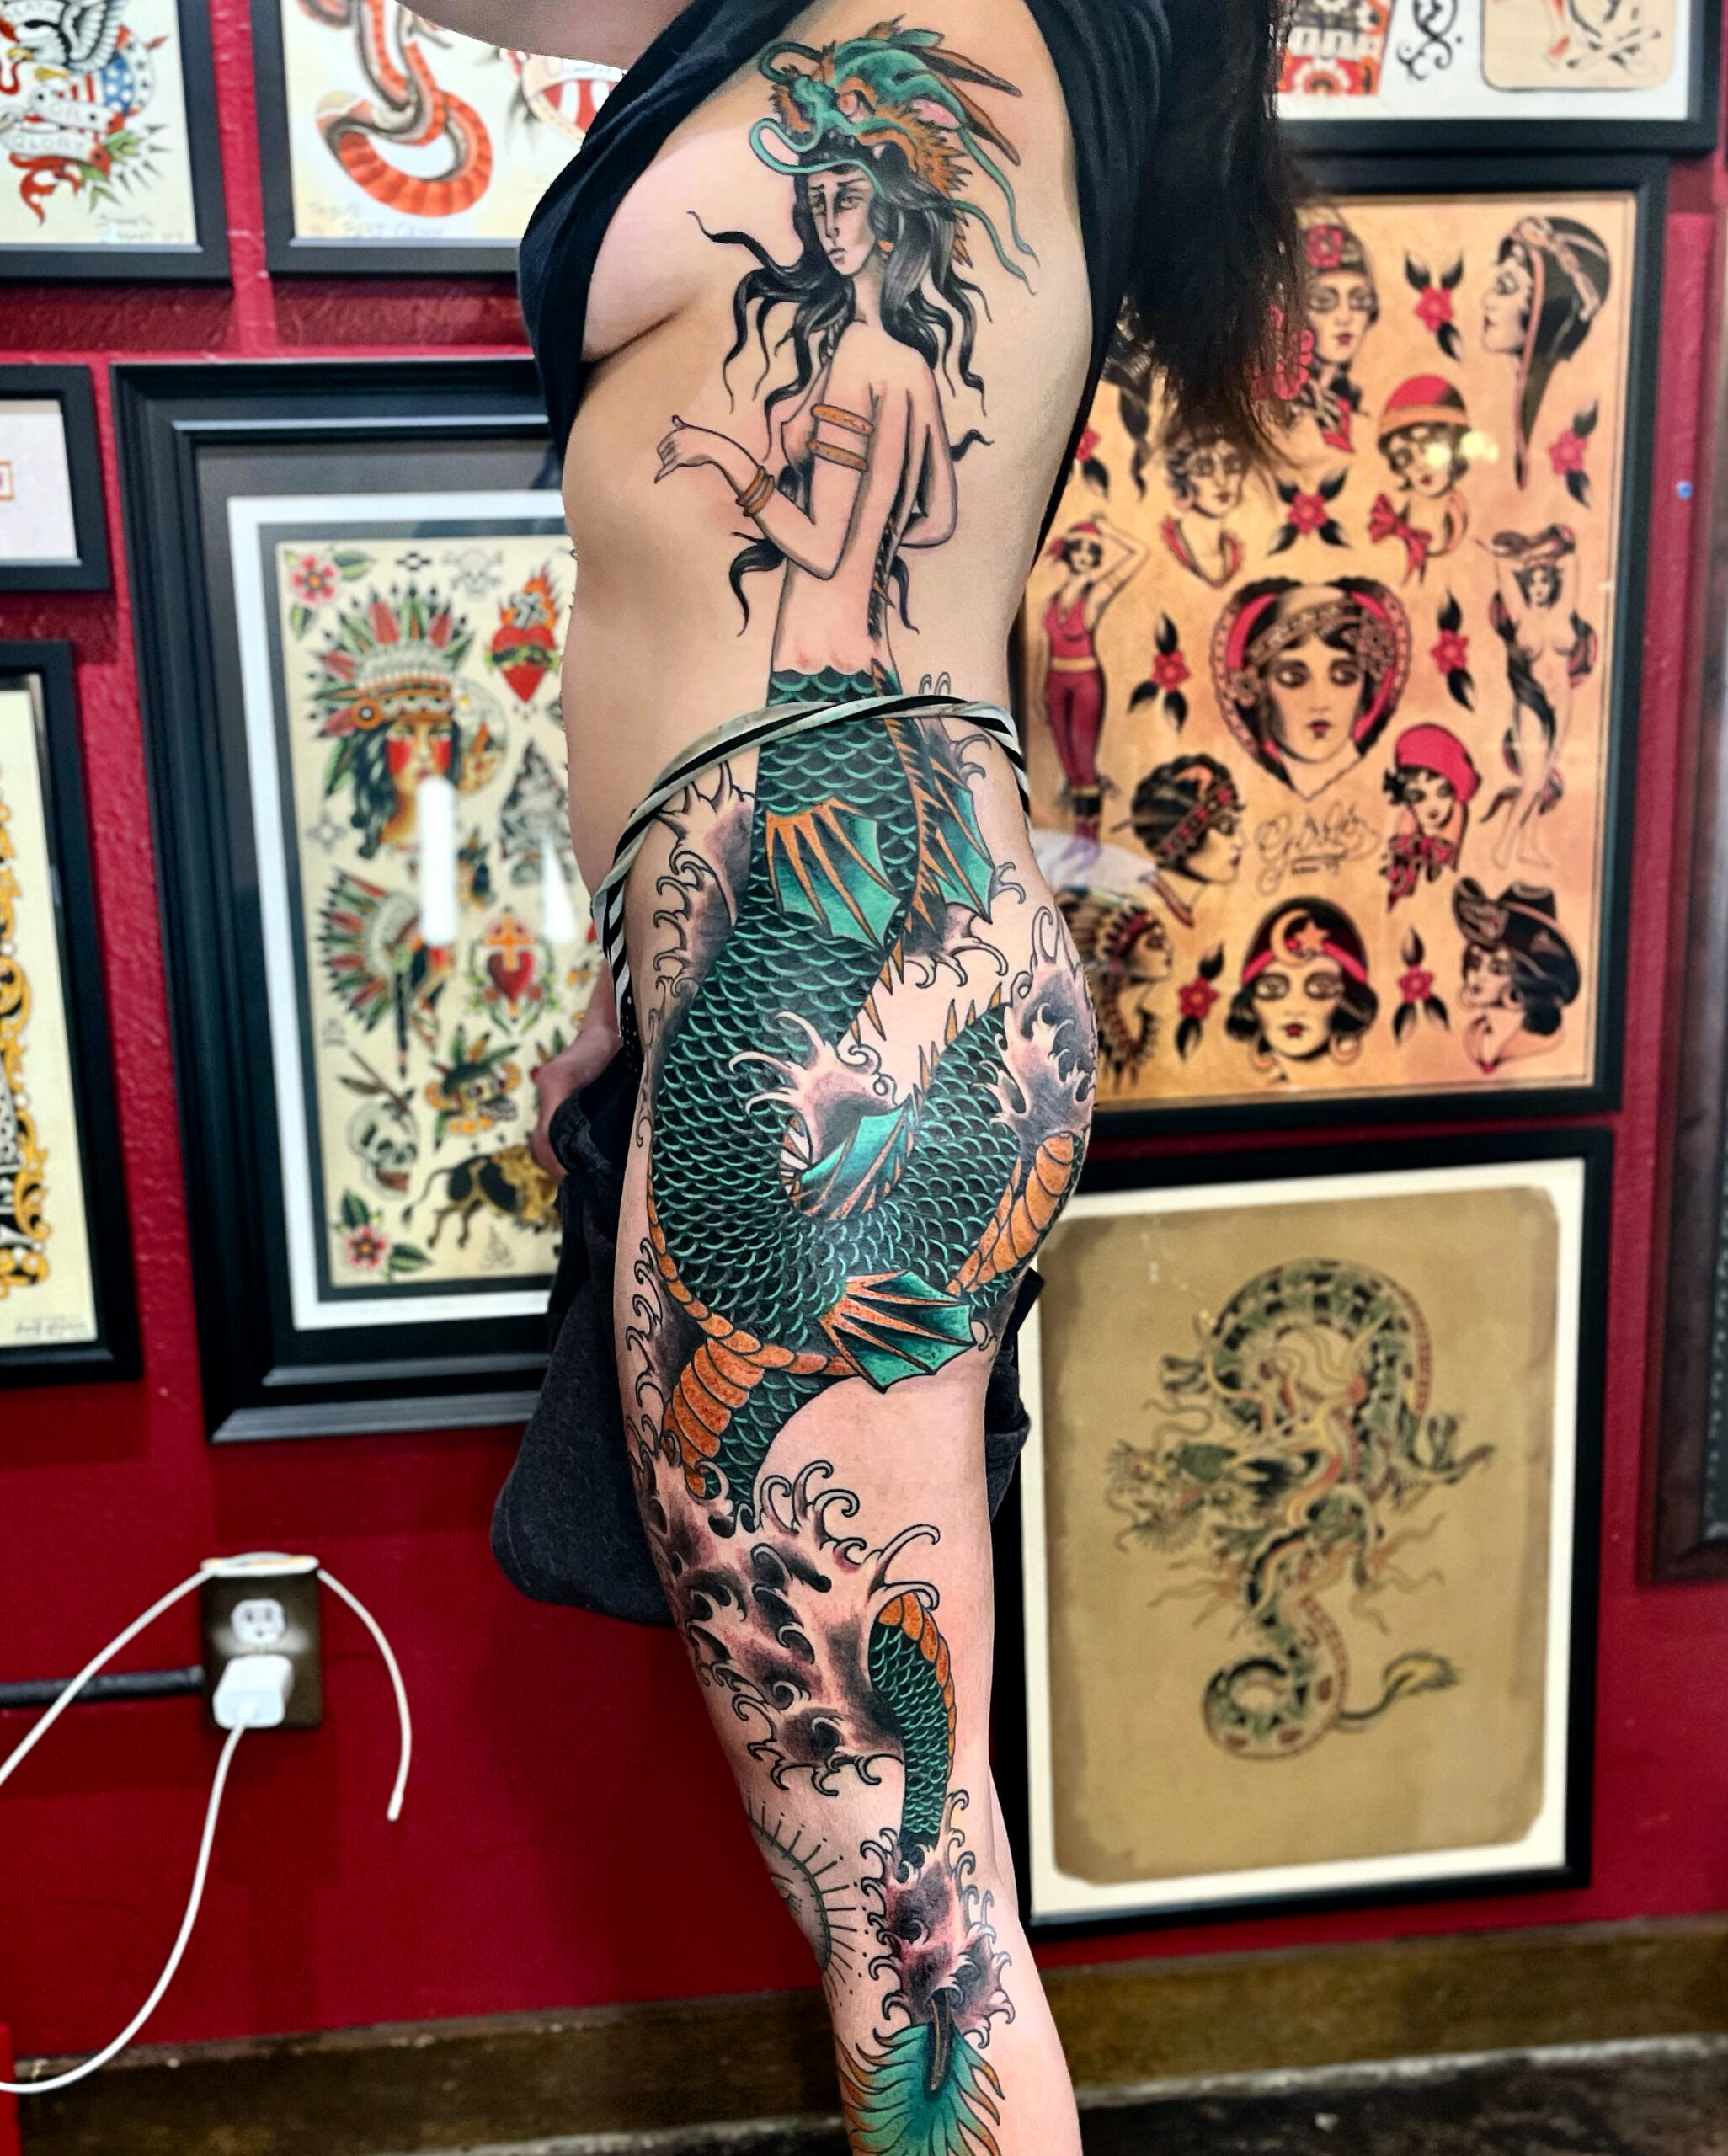 Tattoo of a mermaid down a woman's side